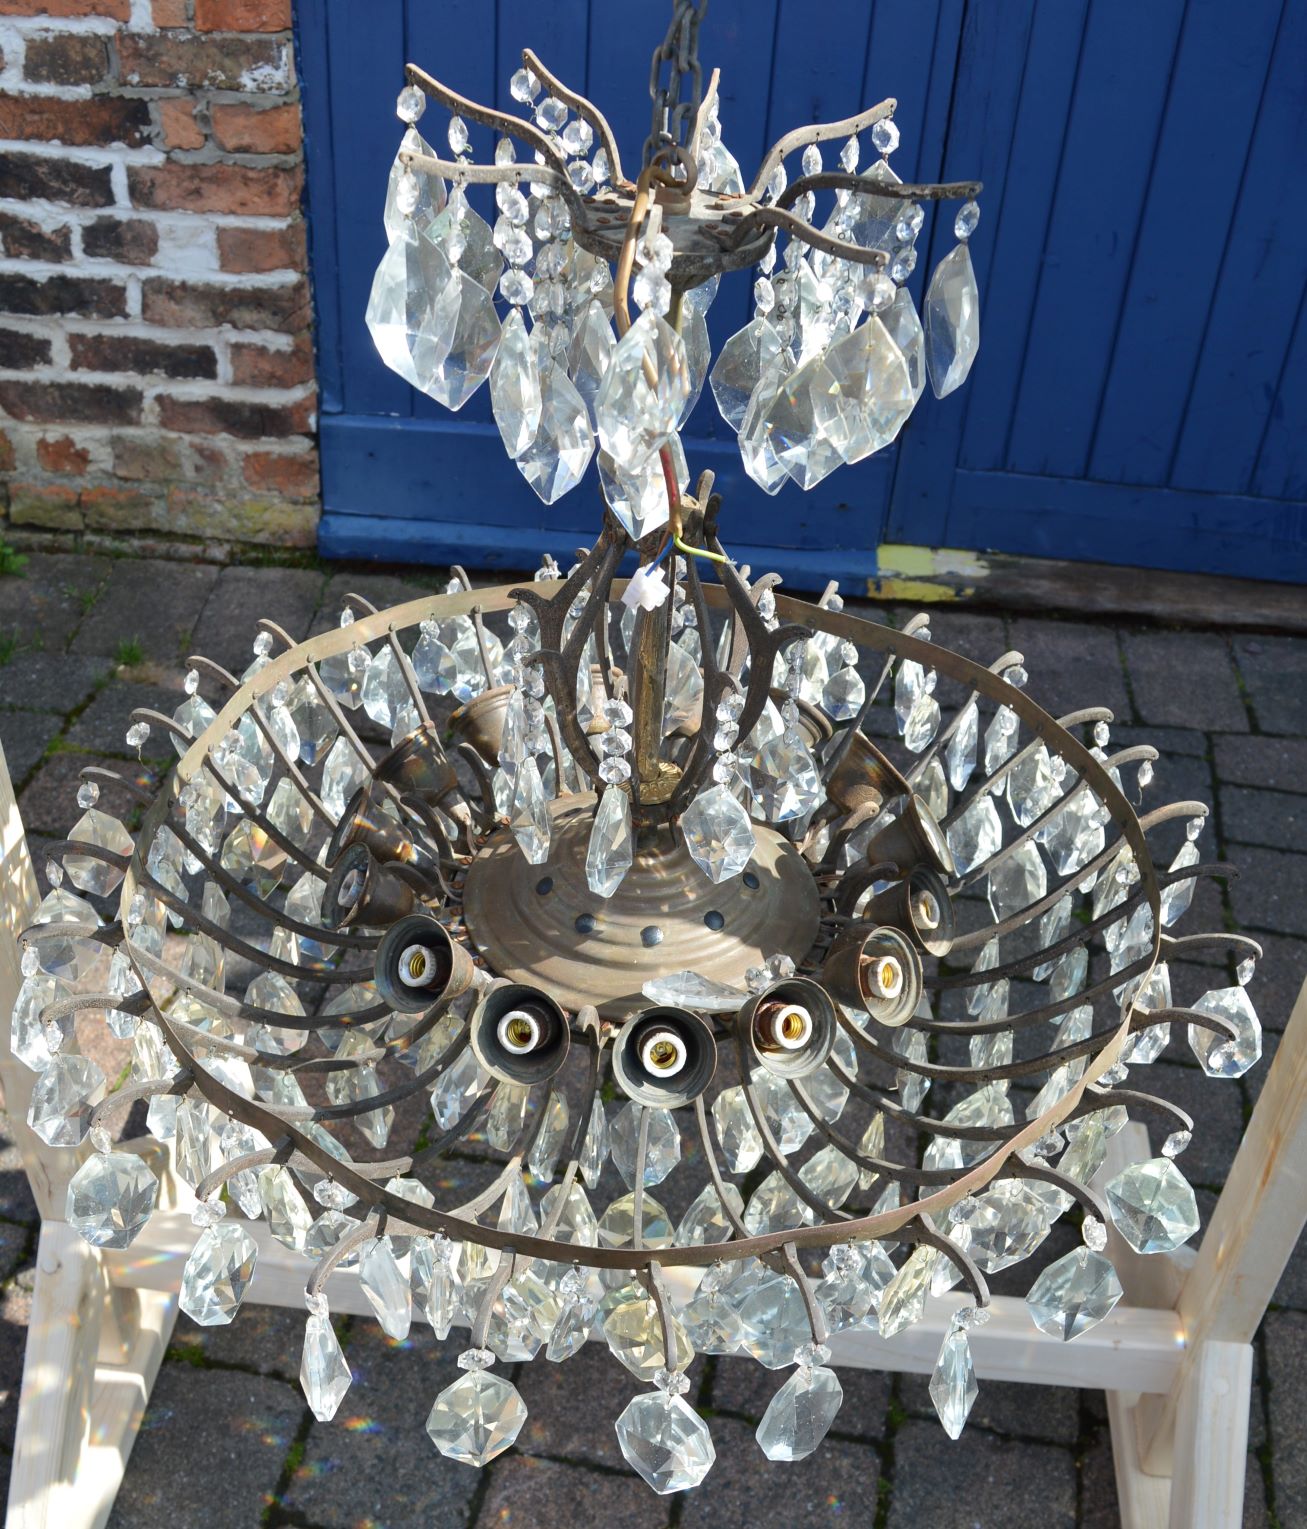 Large chandelier with glass drops Diameter 72cm - Image 2 of 3